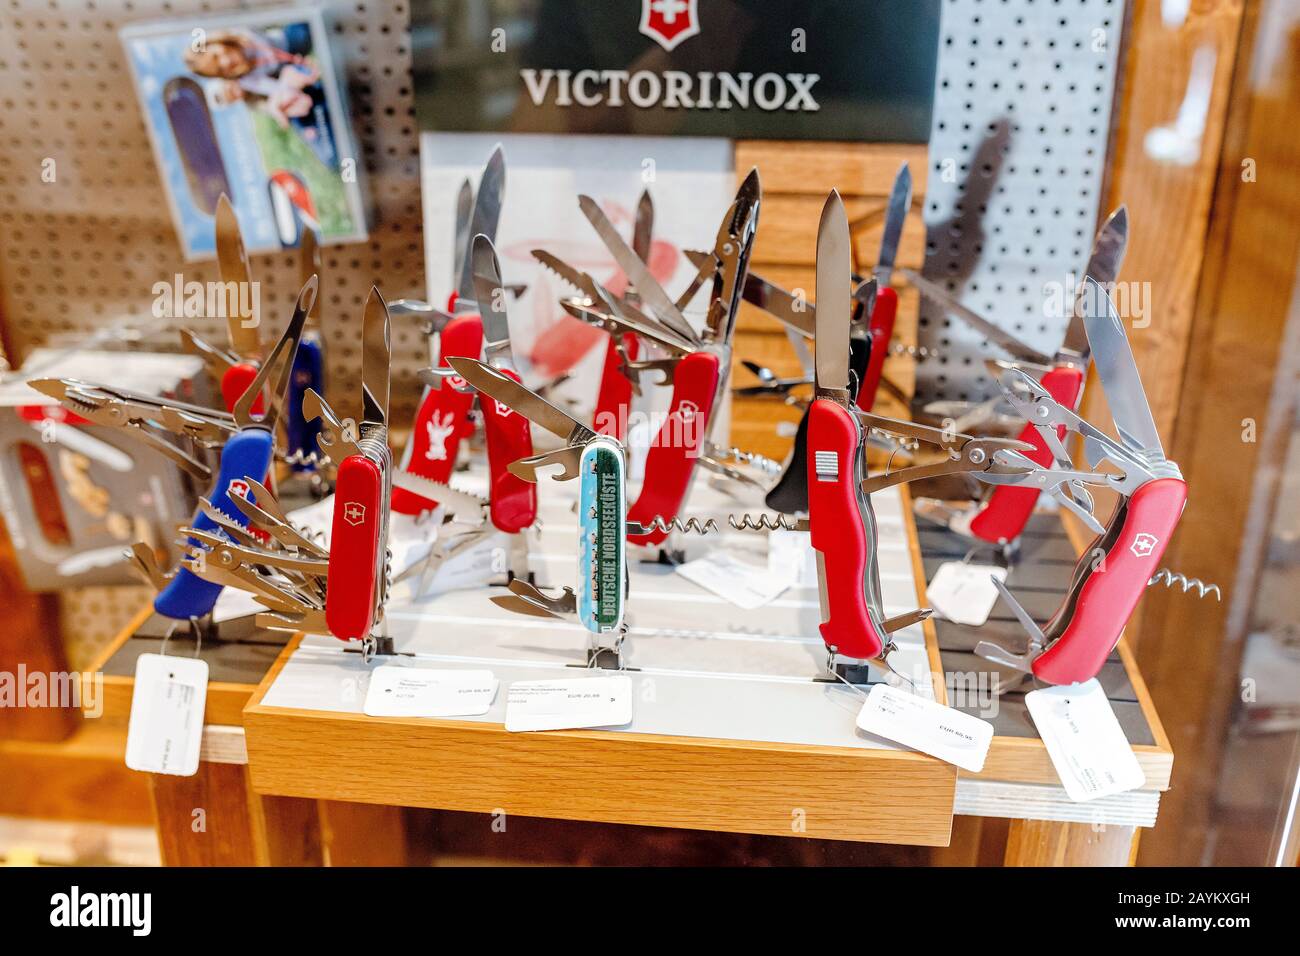 LEIPZIG, GERMANY - MAY 21, 2018: Victorinox knife store in Germany Stock Photo